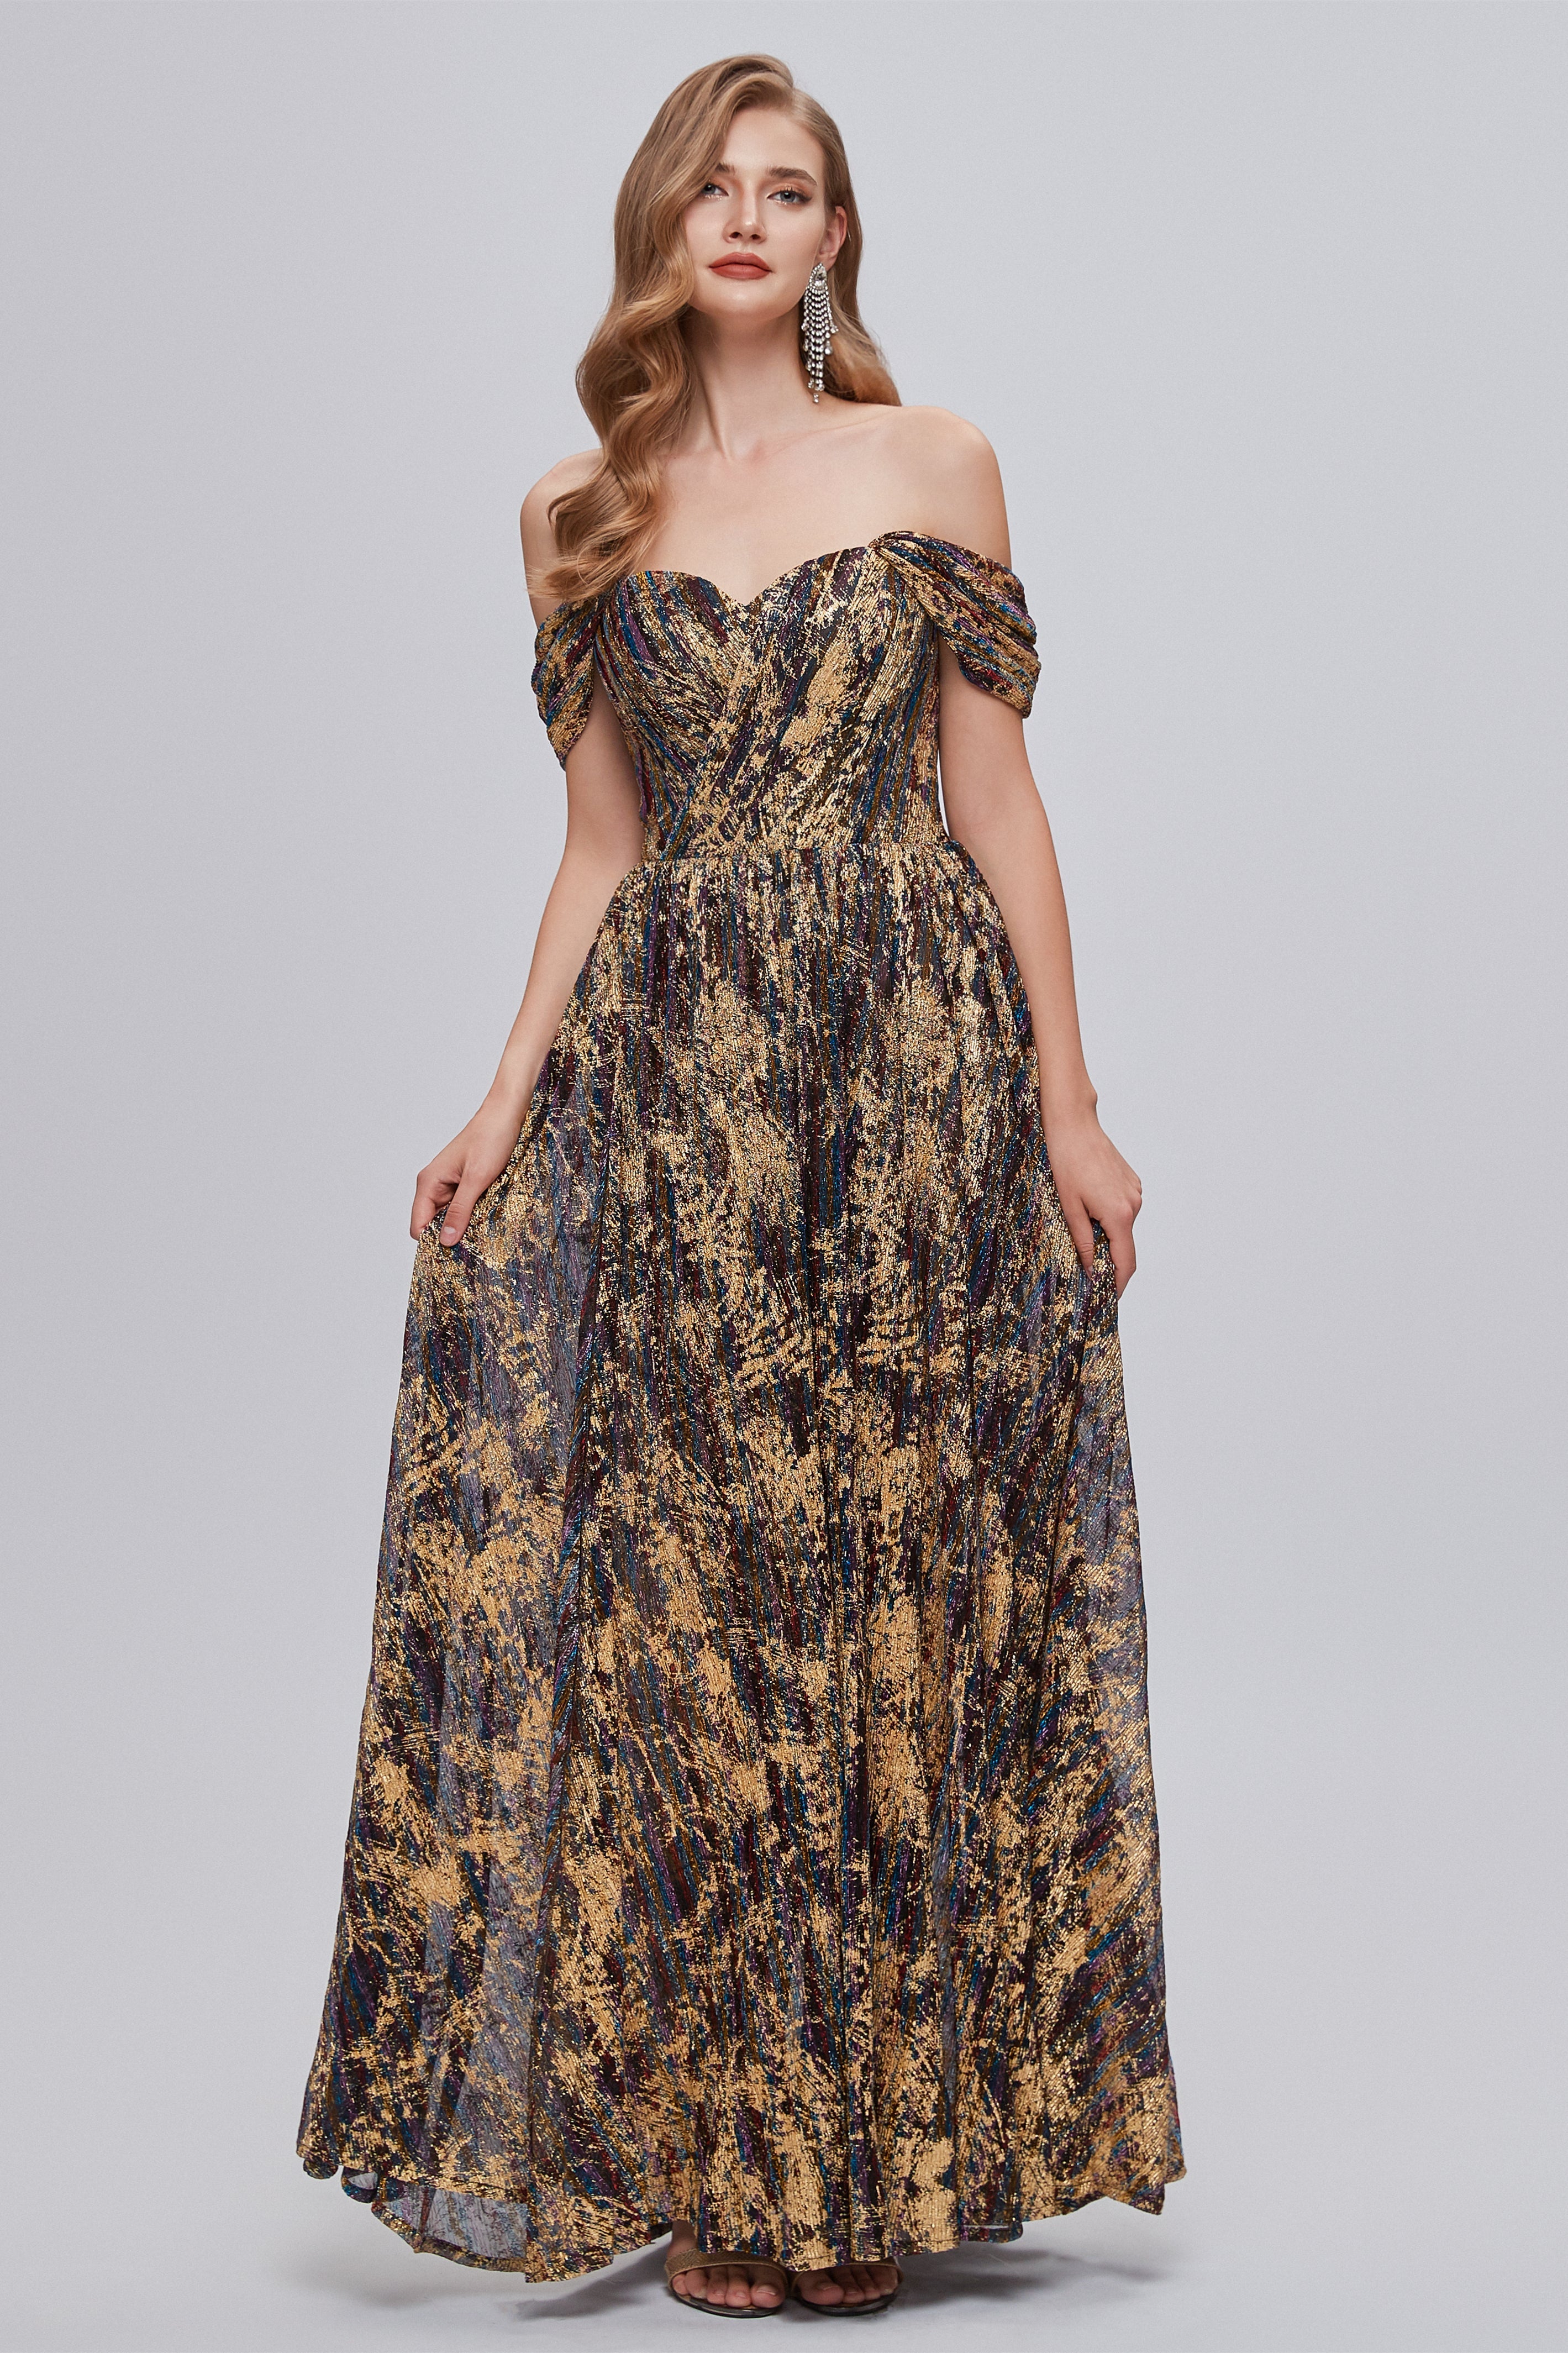 Prom Dressed Long, Black and Brown Floral Print Off-the-Shoulder A-Line Long Prom Dress